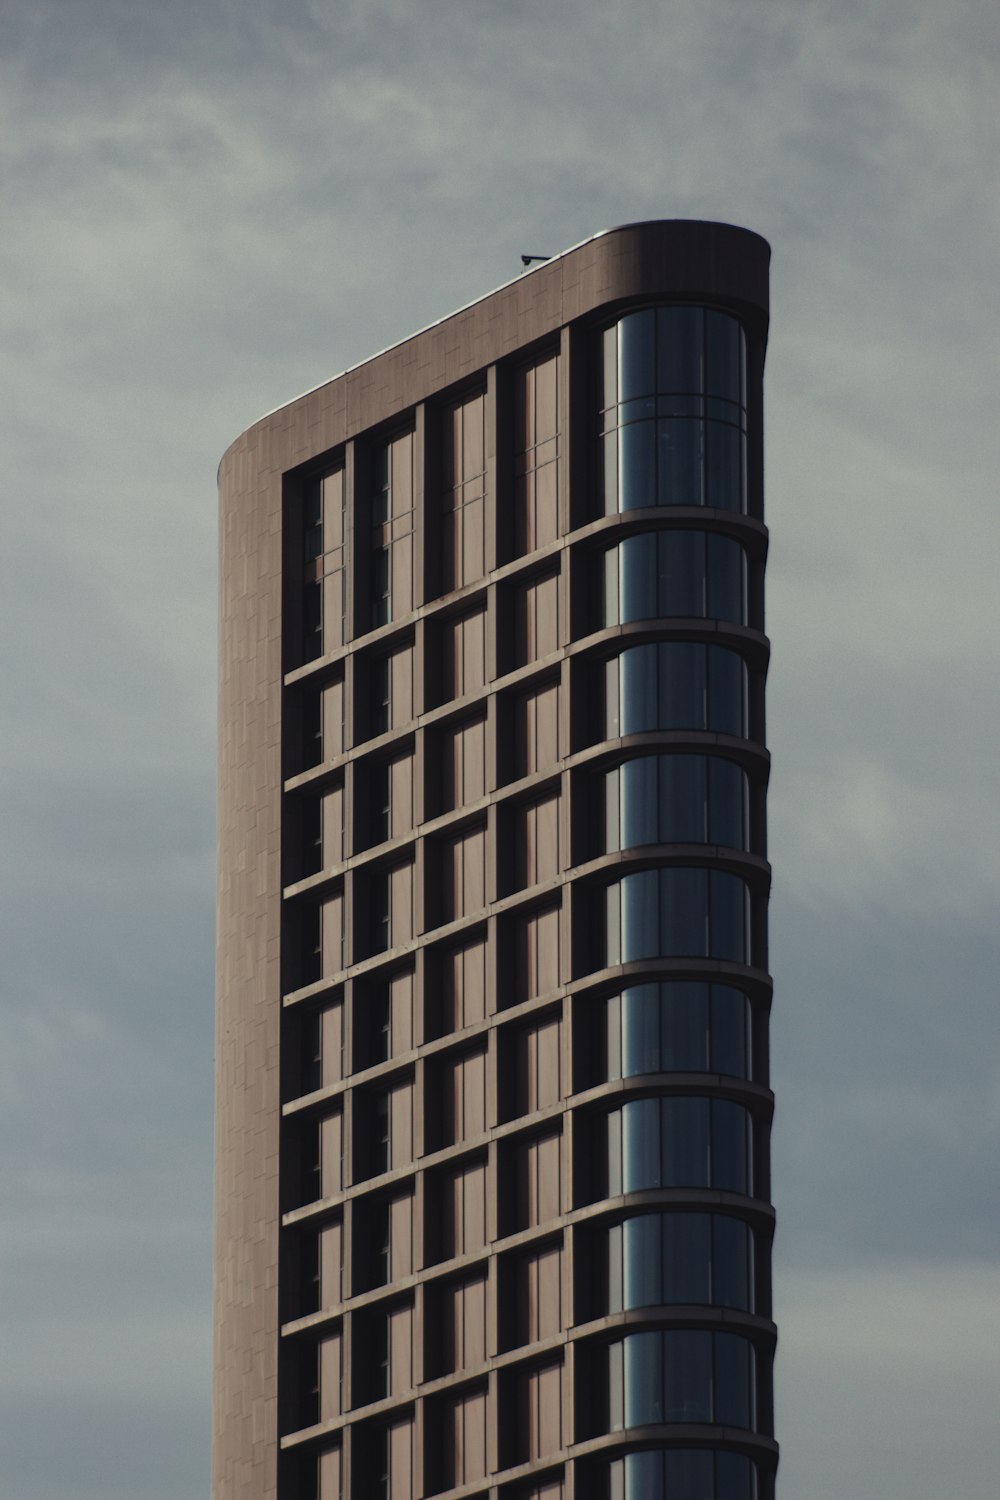 brown concrete building under cloudy sky during daytime